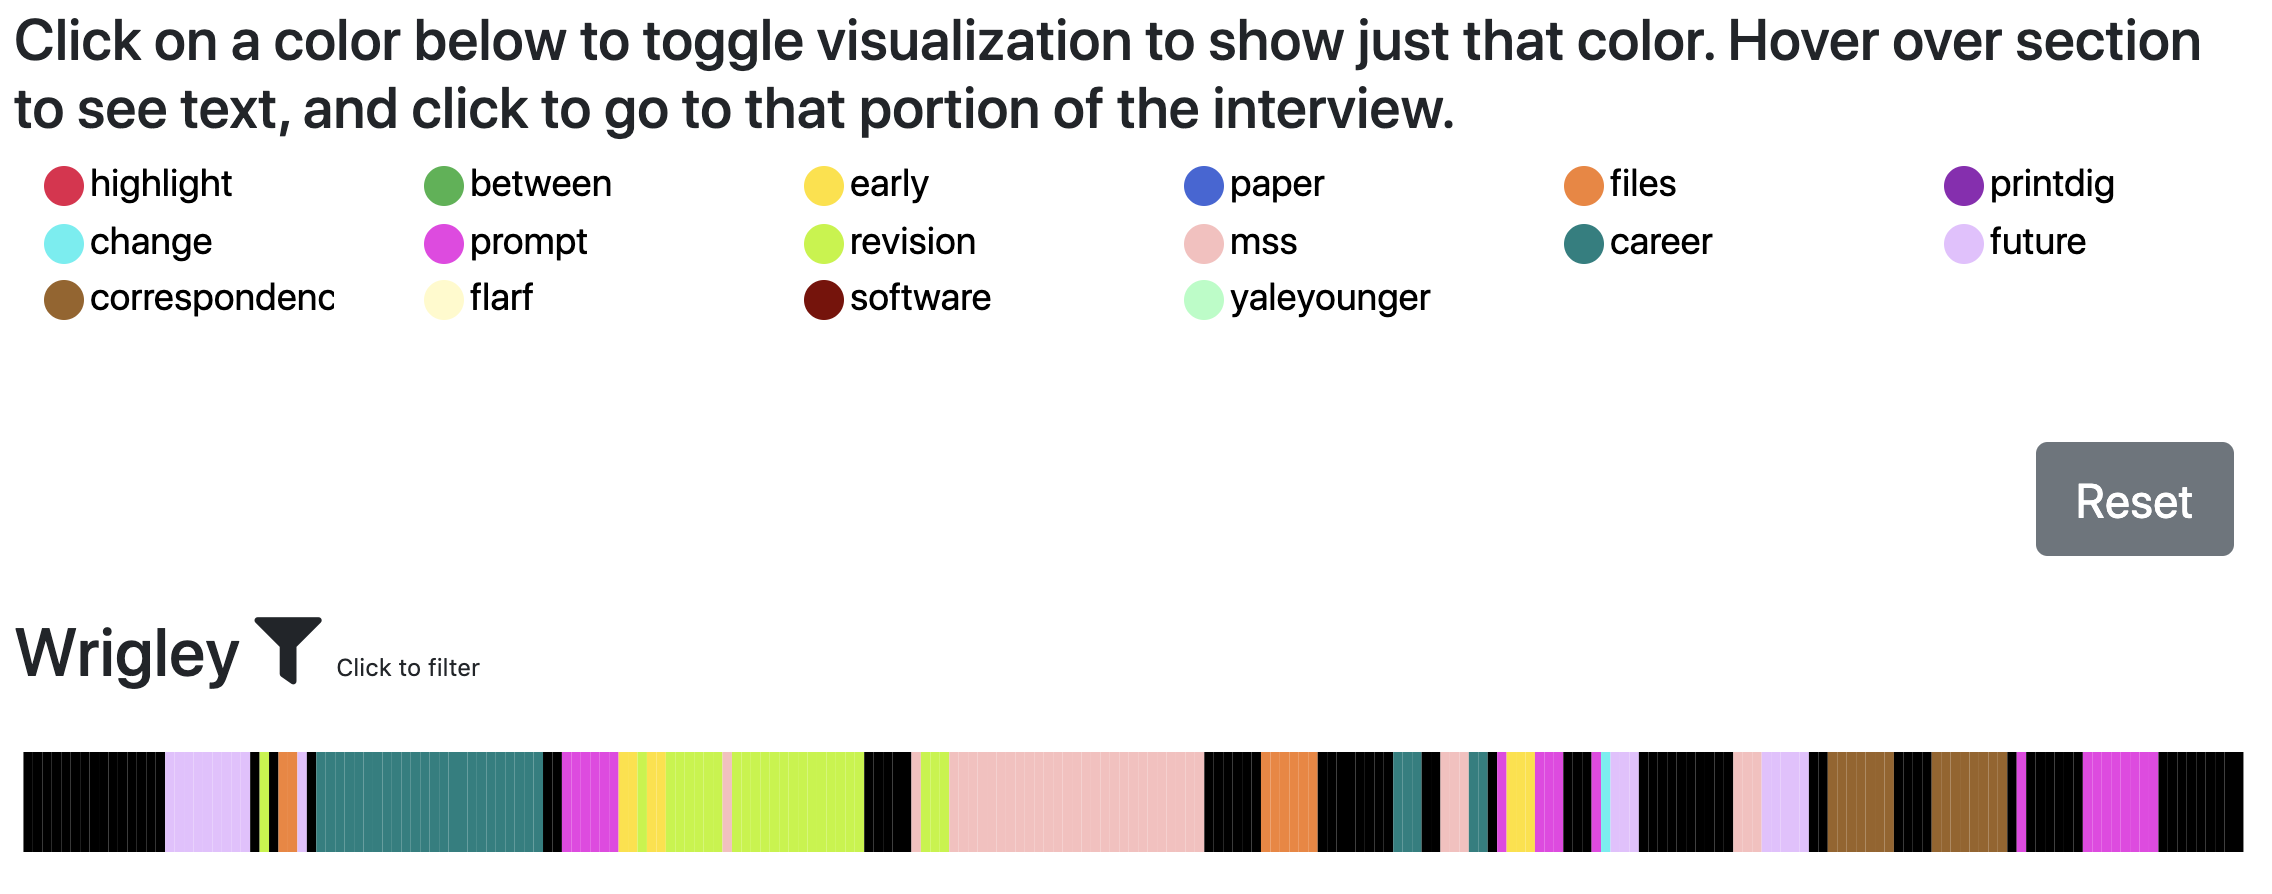 picture of finished visualization